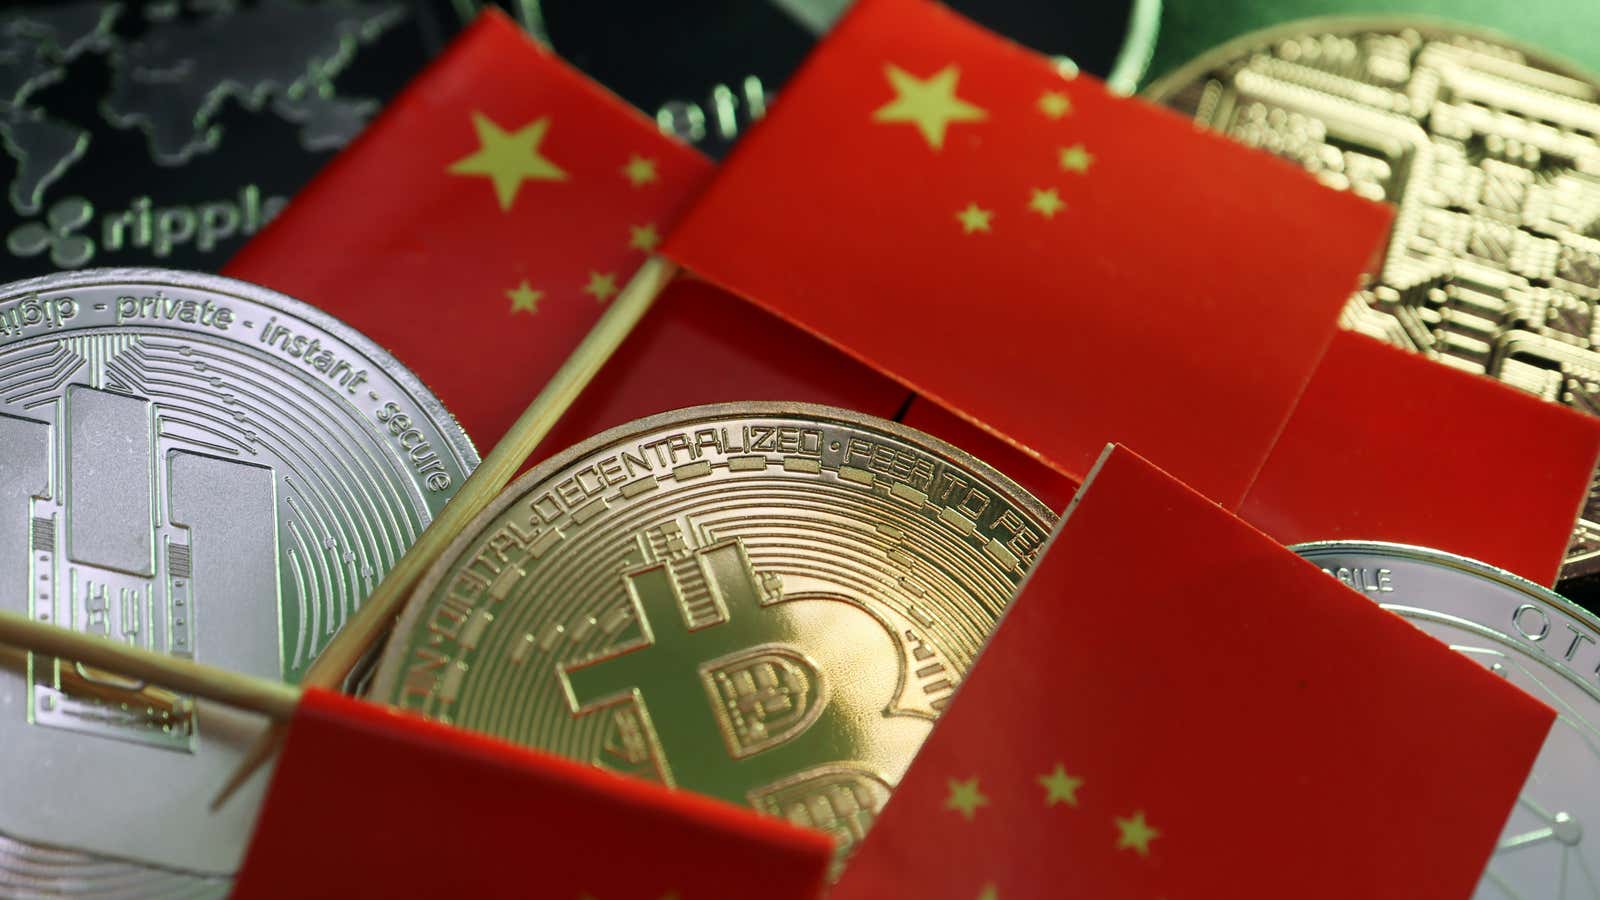 China is cracking down on crypto.